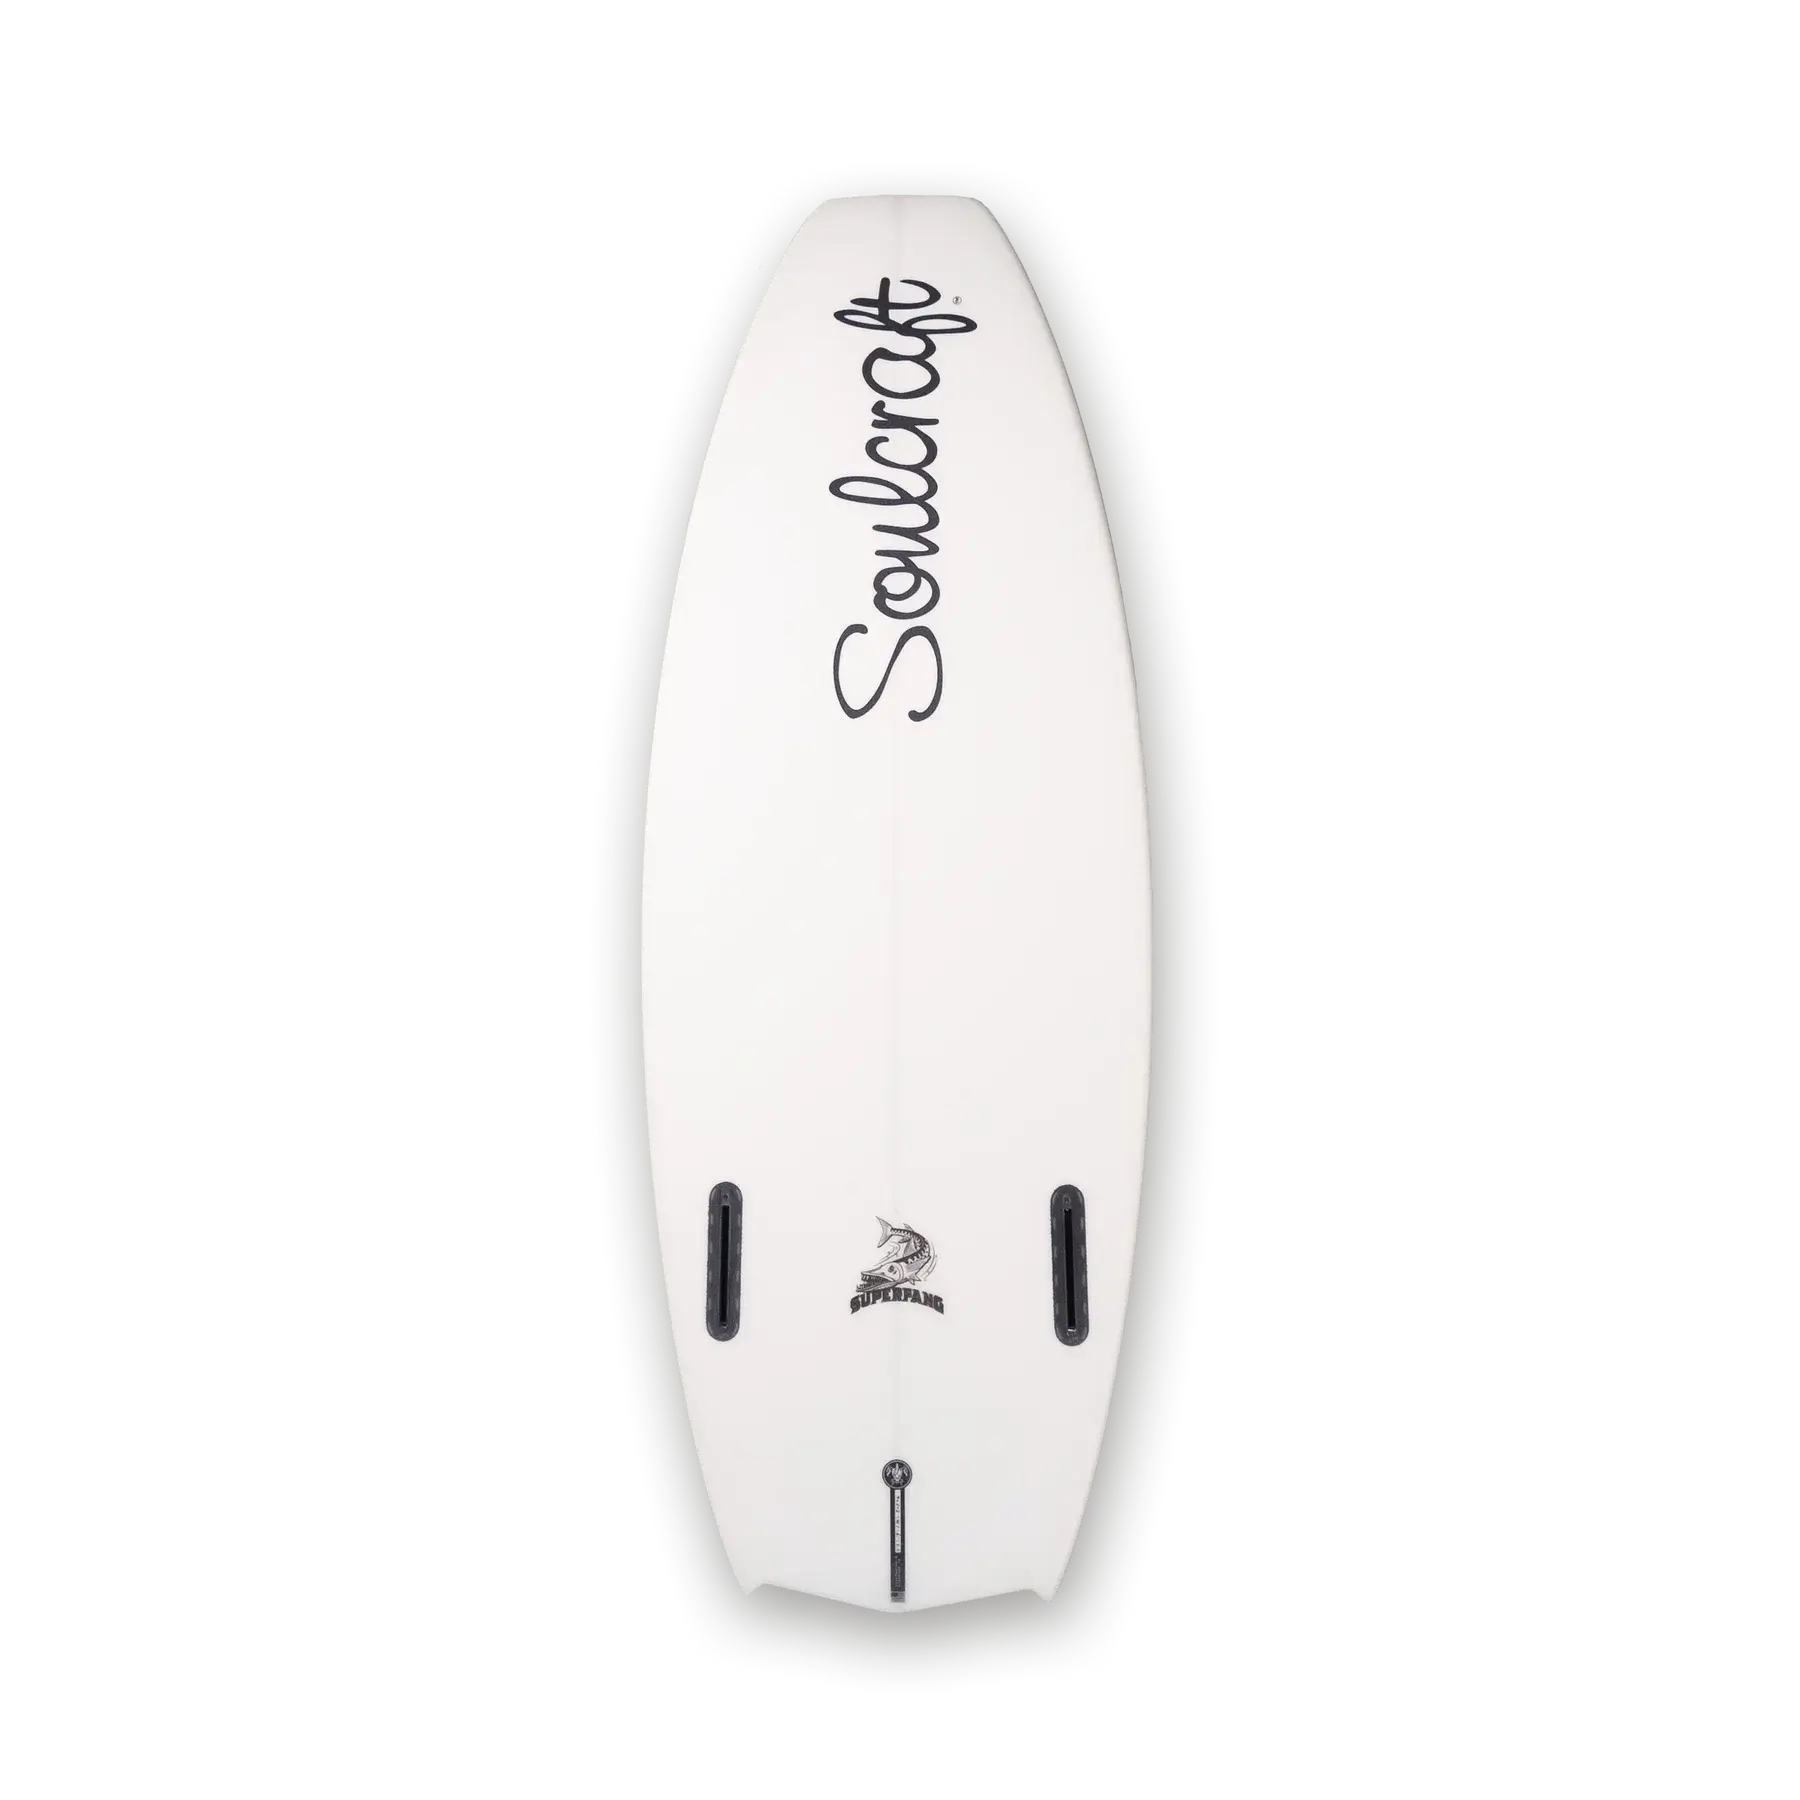 A Soulcraft SuperFang Wakesurf Board with a black logo on it.